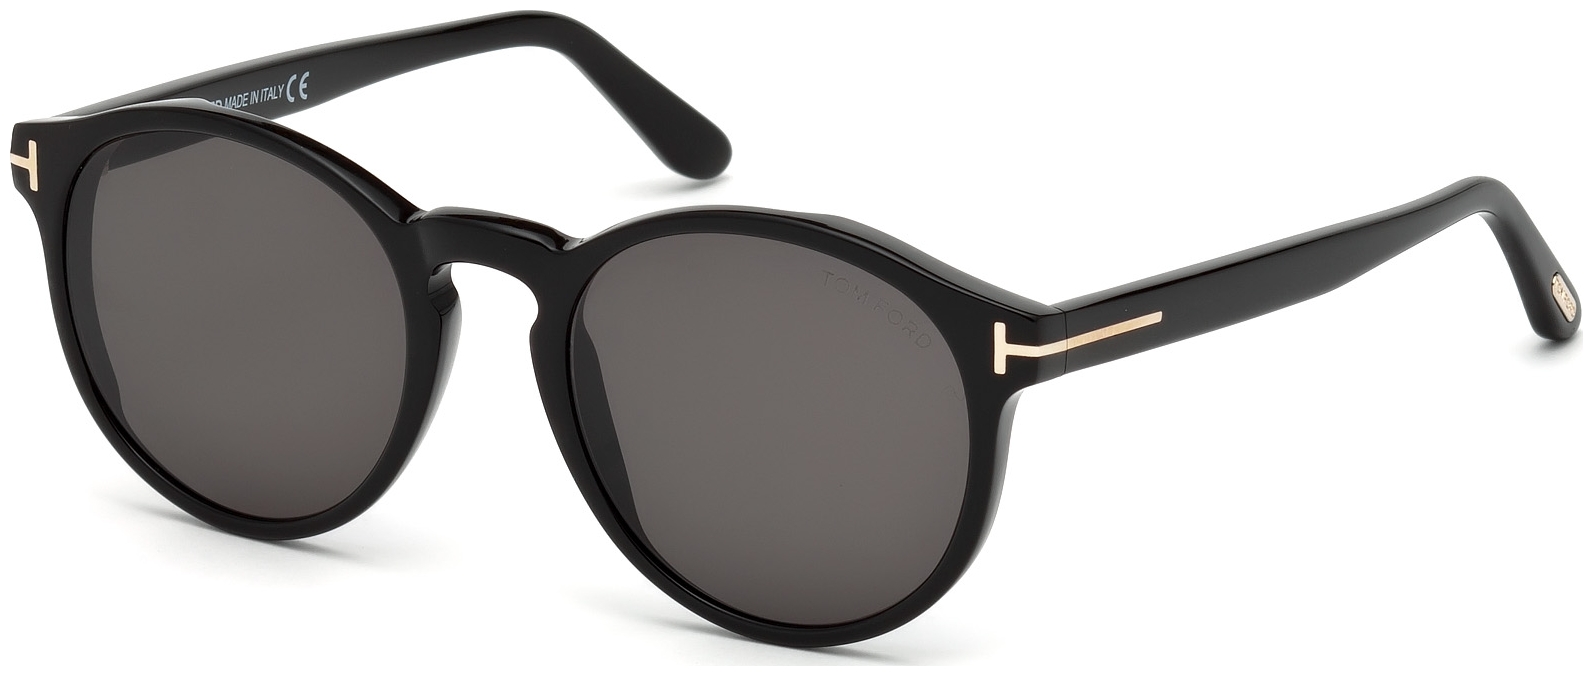 Tom Ford FT0591 01A IAN-02